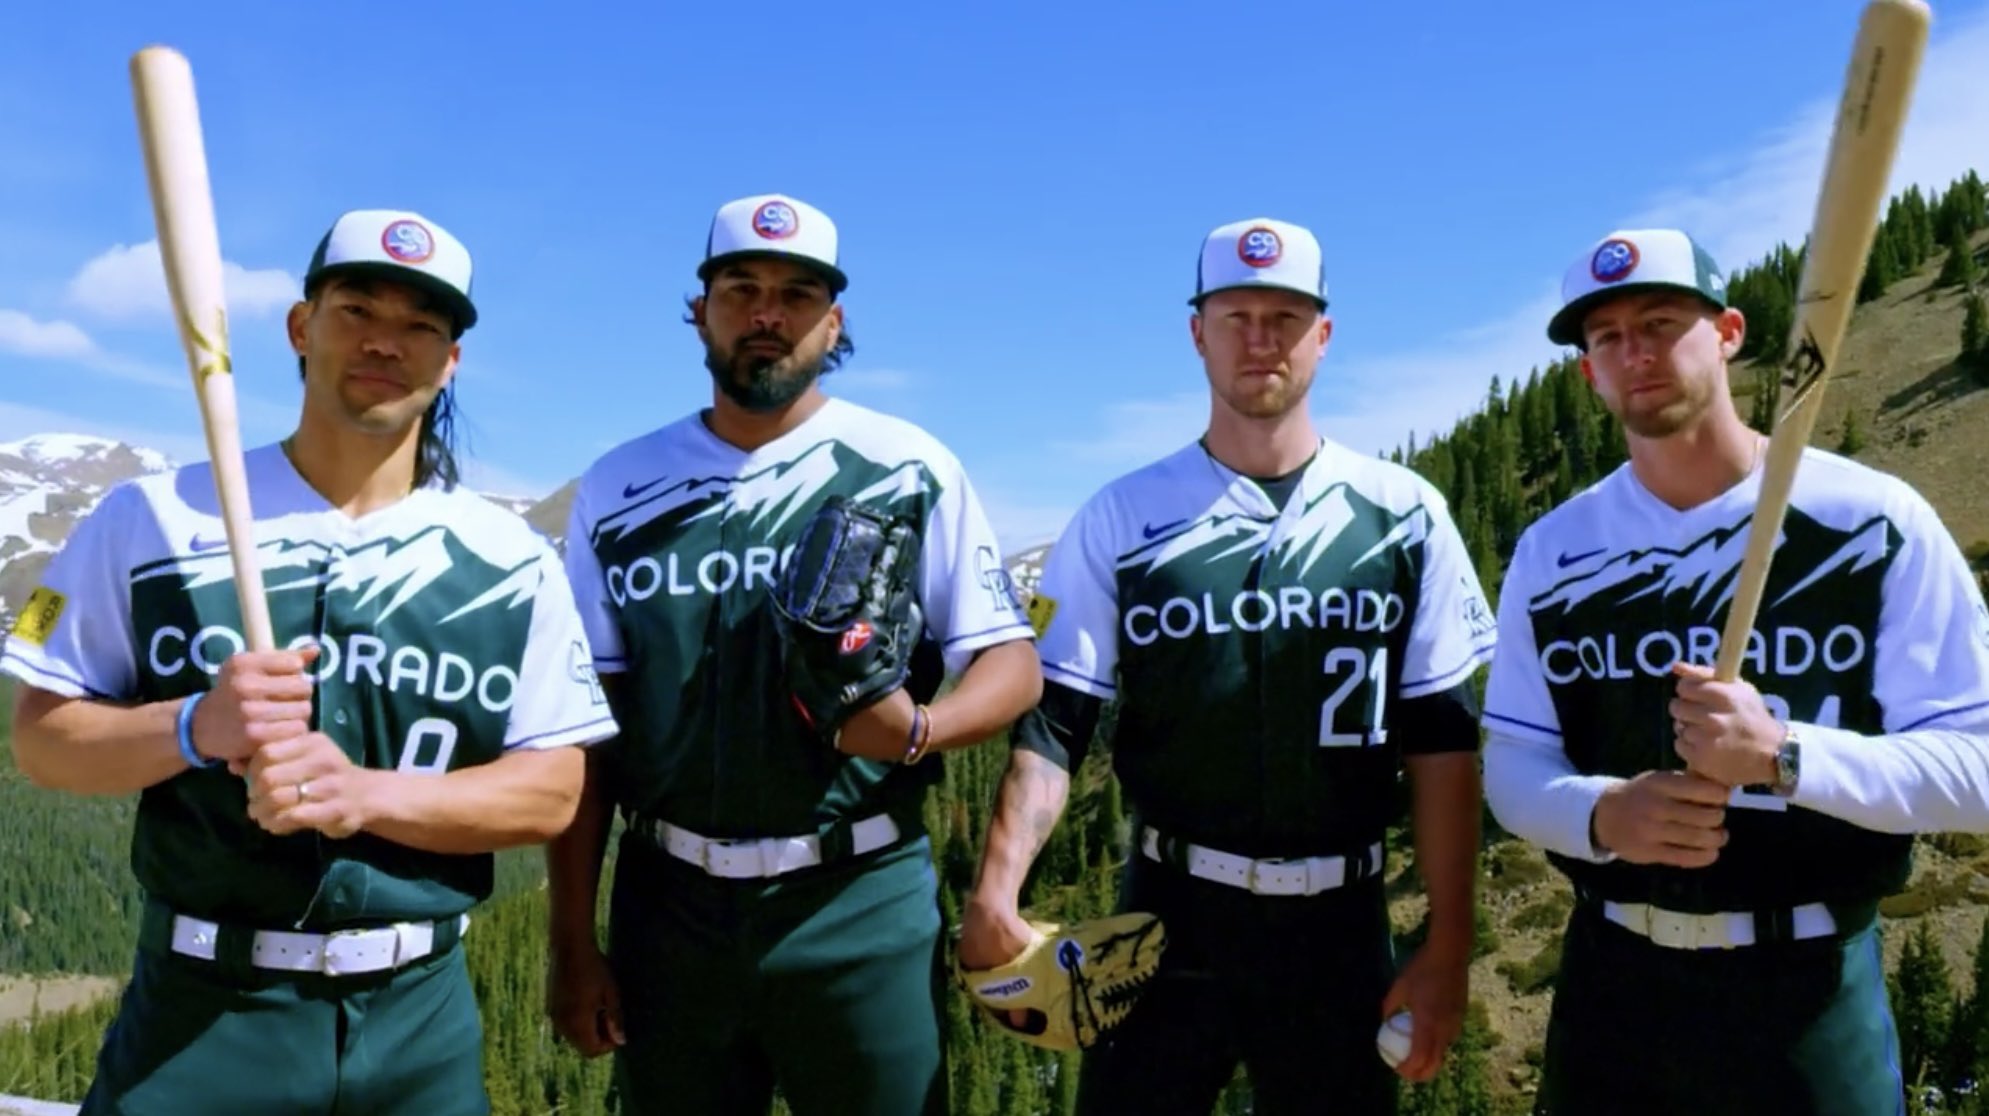 What do you think of the Rockies City Connect uniform? #rockies